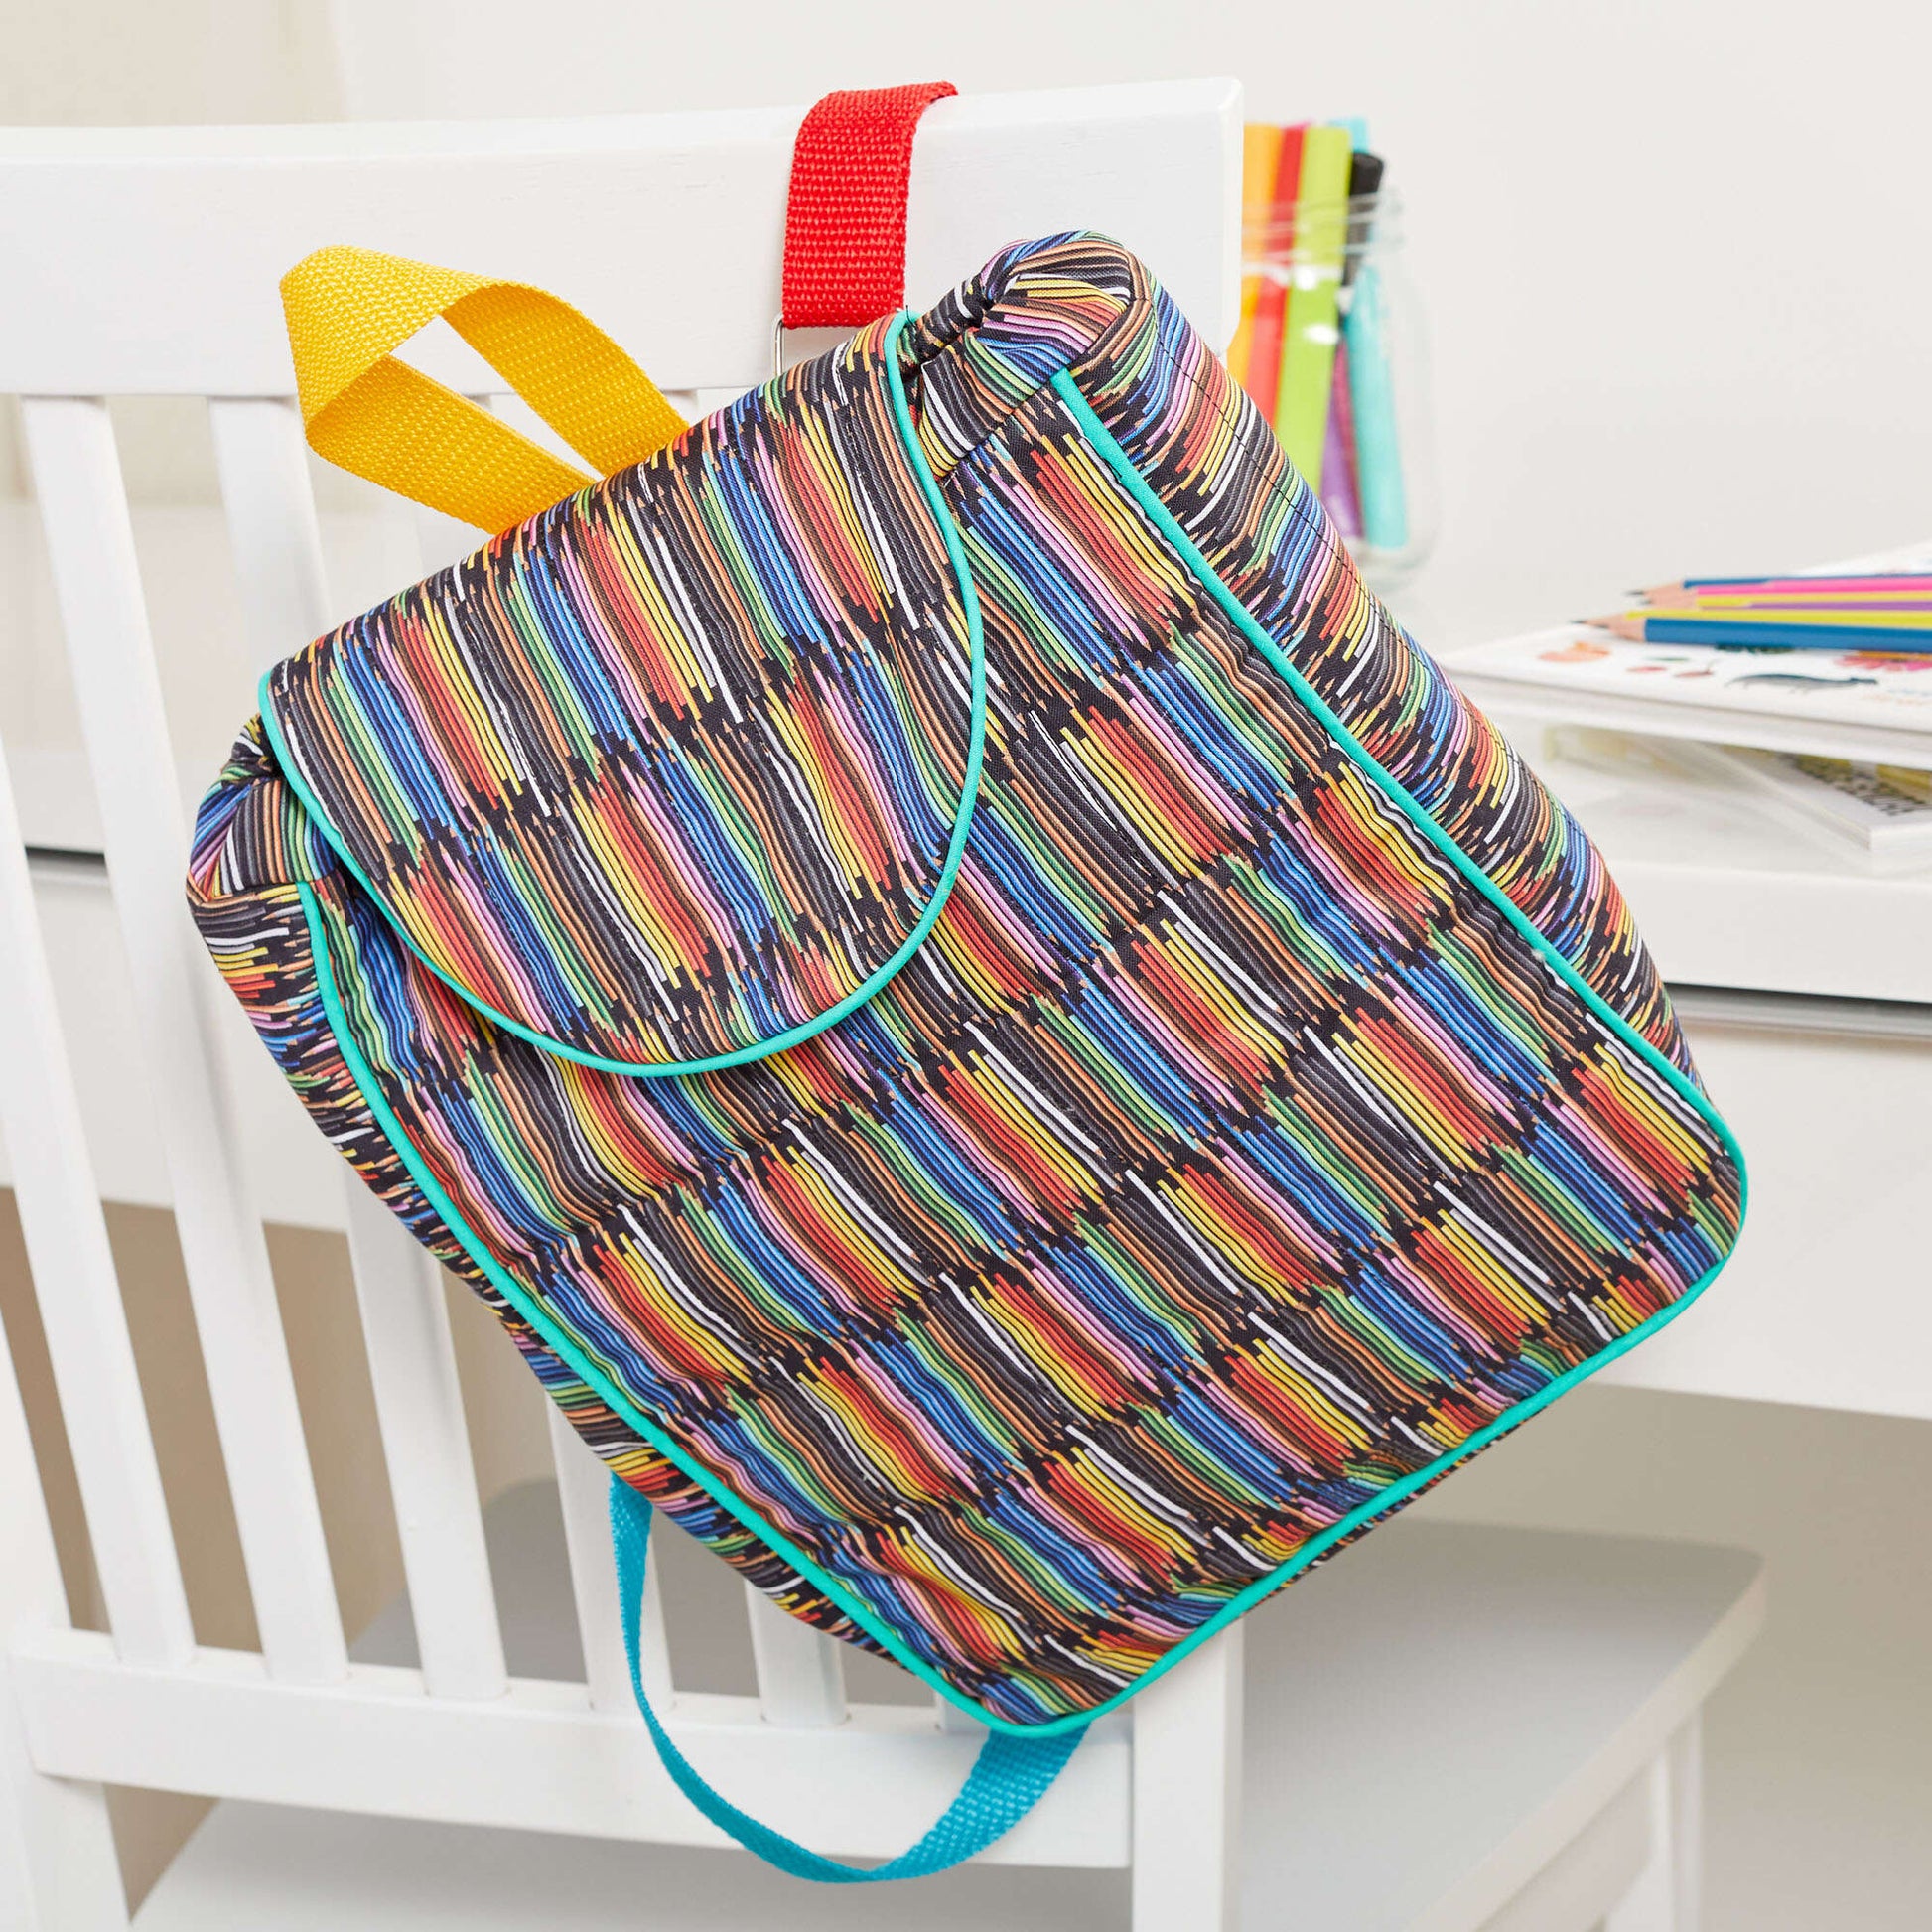 Free Coats & Clark Sewing Backpack To School Pattern